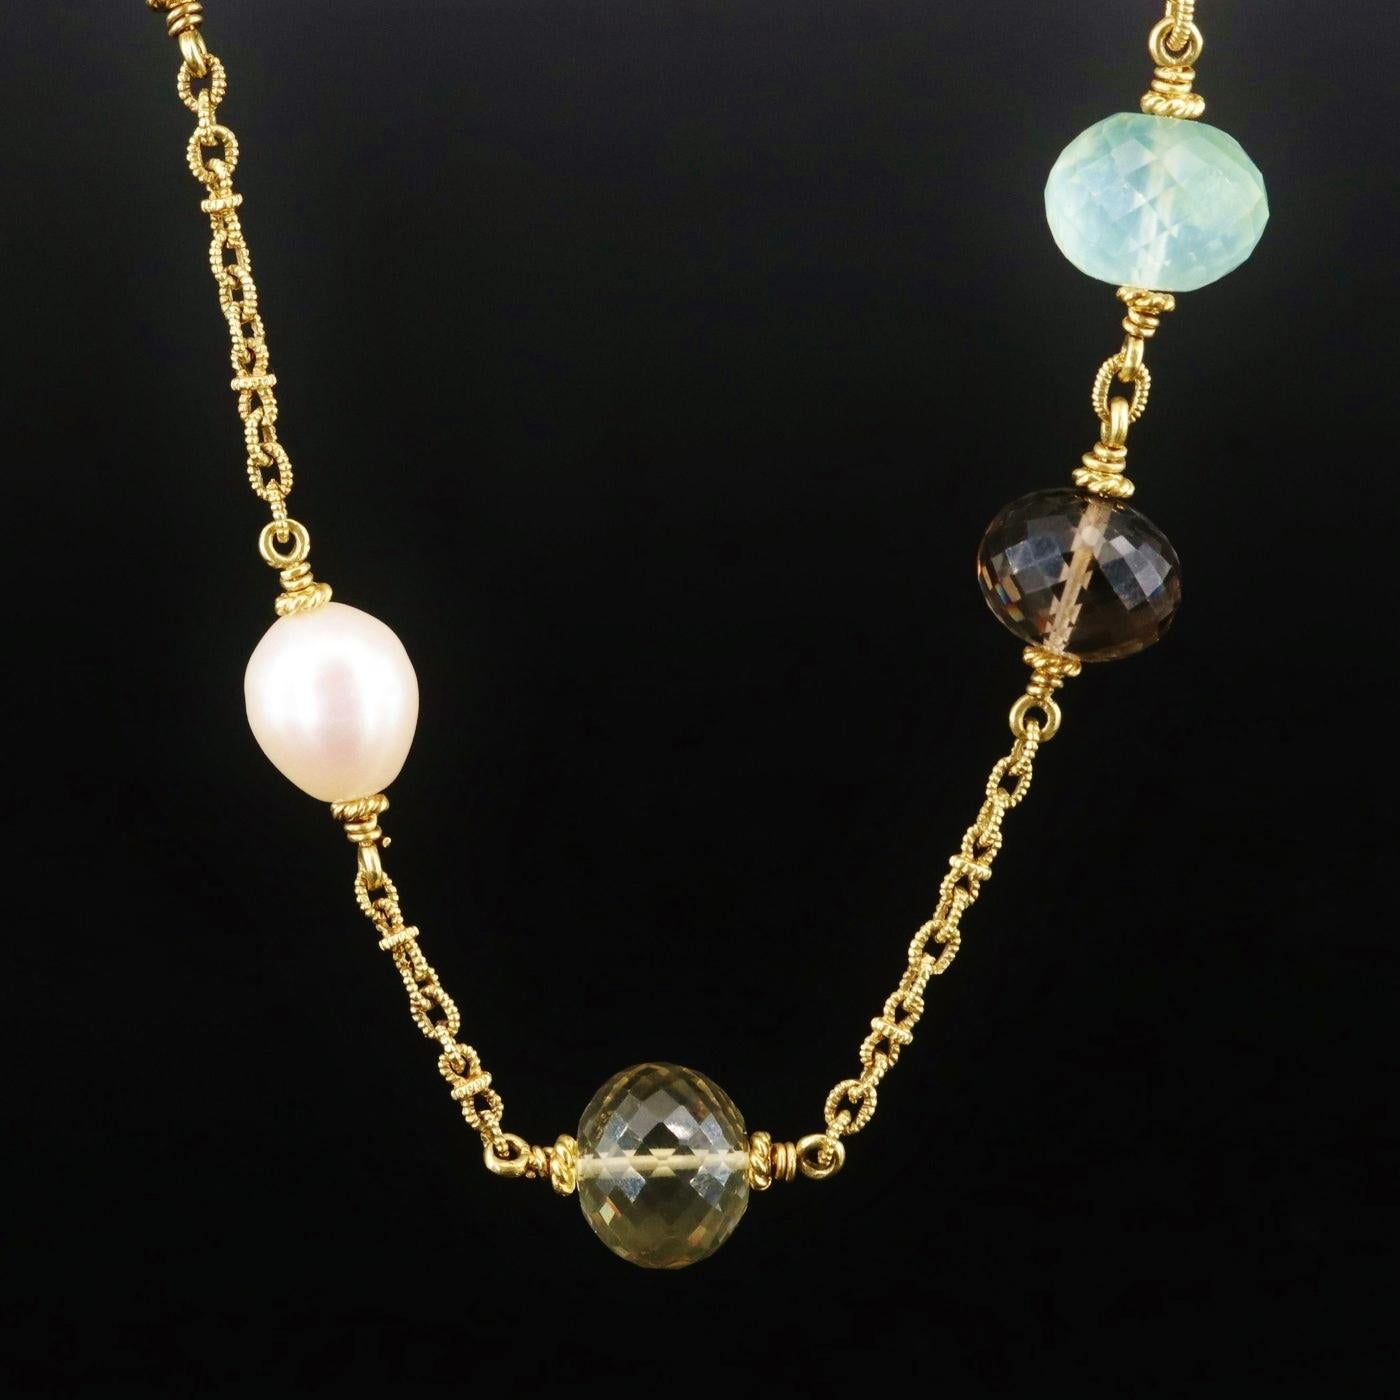 Designer Judith Ripka Necklace (stamped with the designer hallmarks)

Bahama Mama collection

NEW with tags, Tag Price $29000

18K solid Yellow gold

Very heavy and well made, 80.5 grams in weight 

Top Quality Diamond, Gemstone and Pearls, top